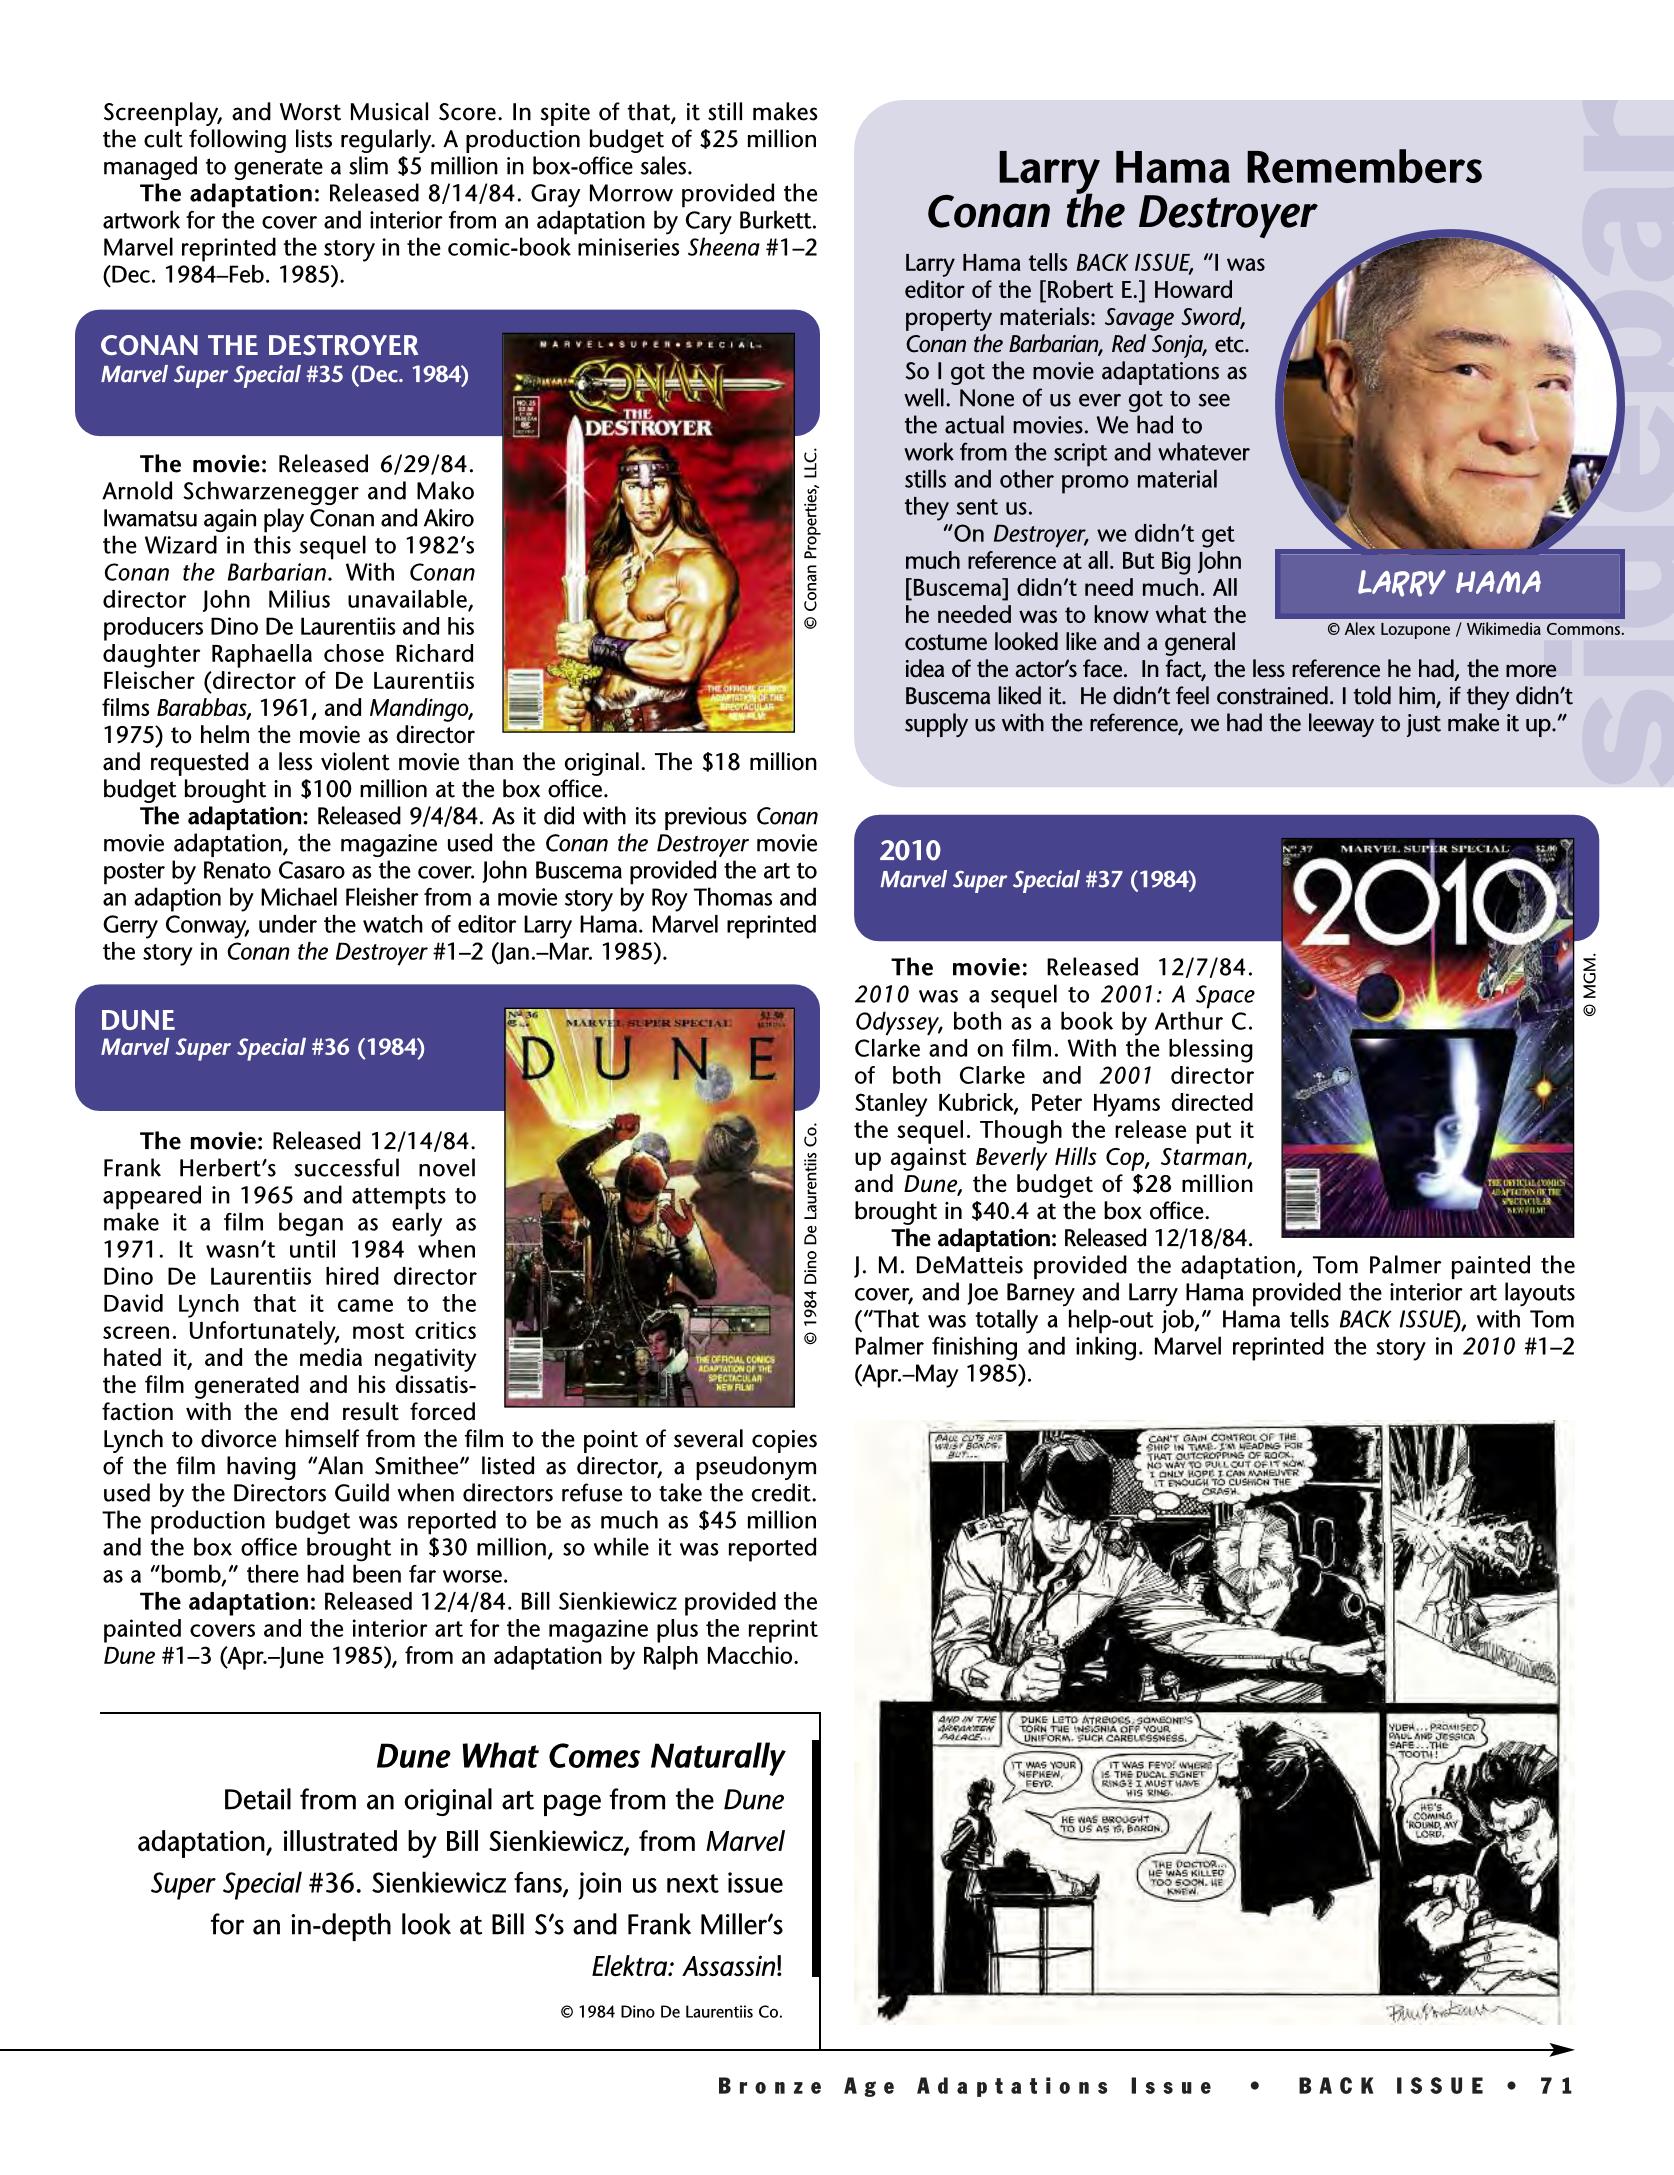 Read online Back Issue comic -  Issue #89 - 71